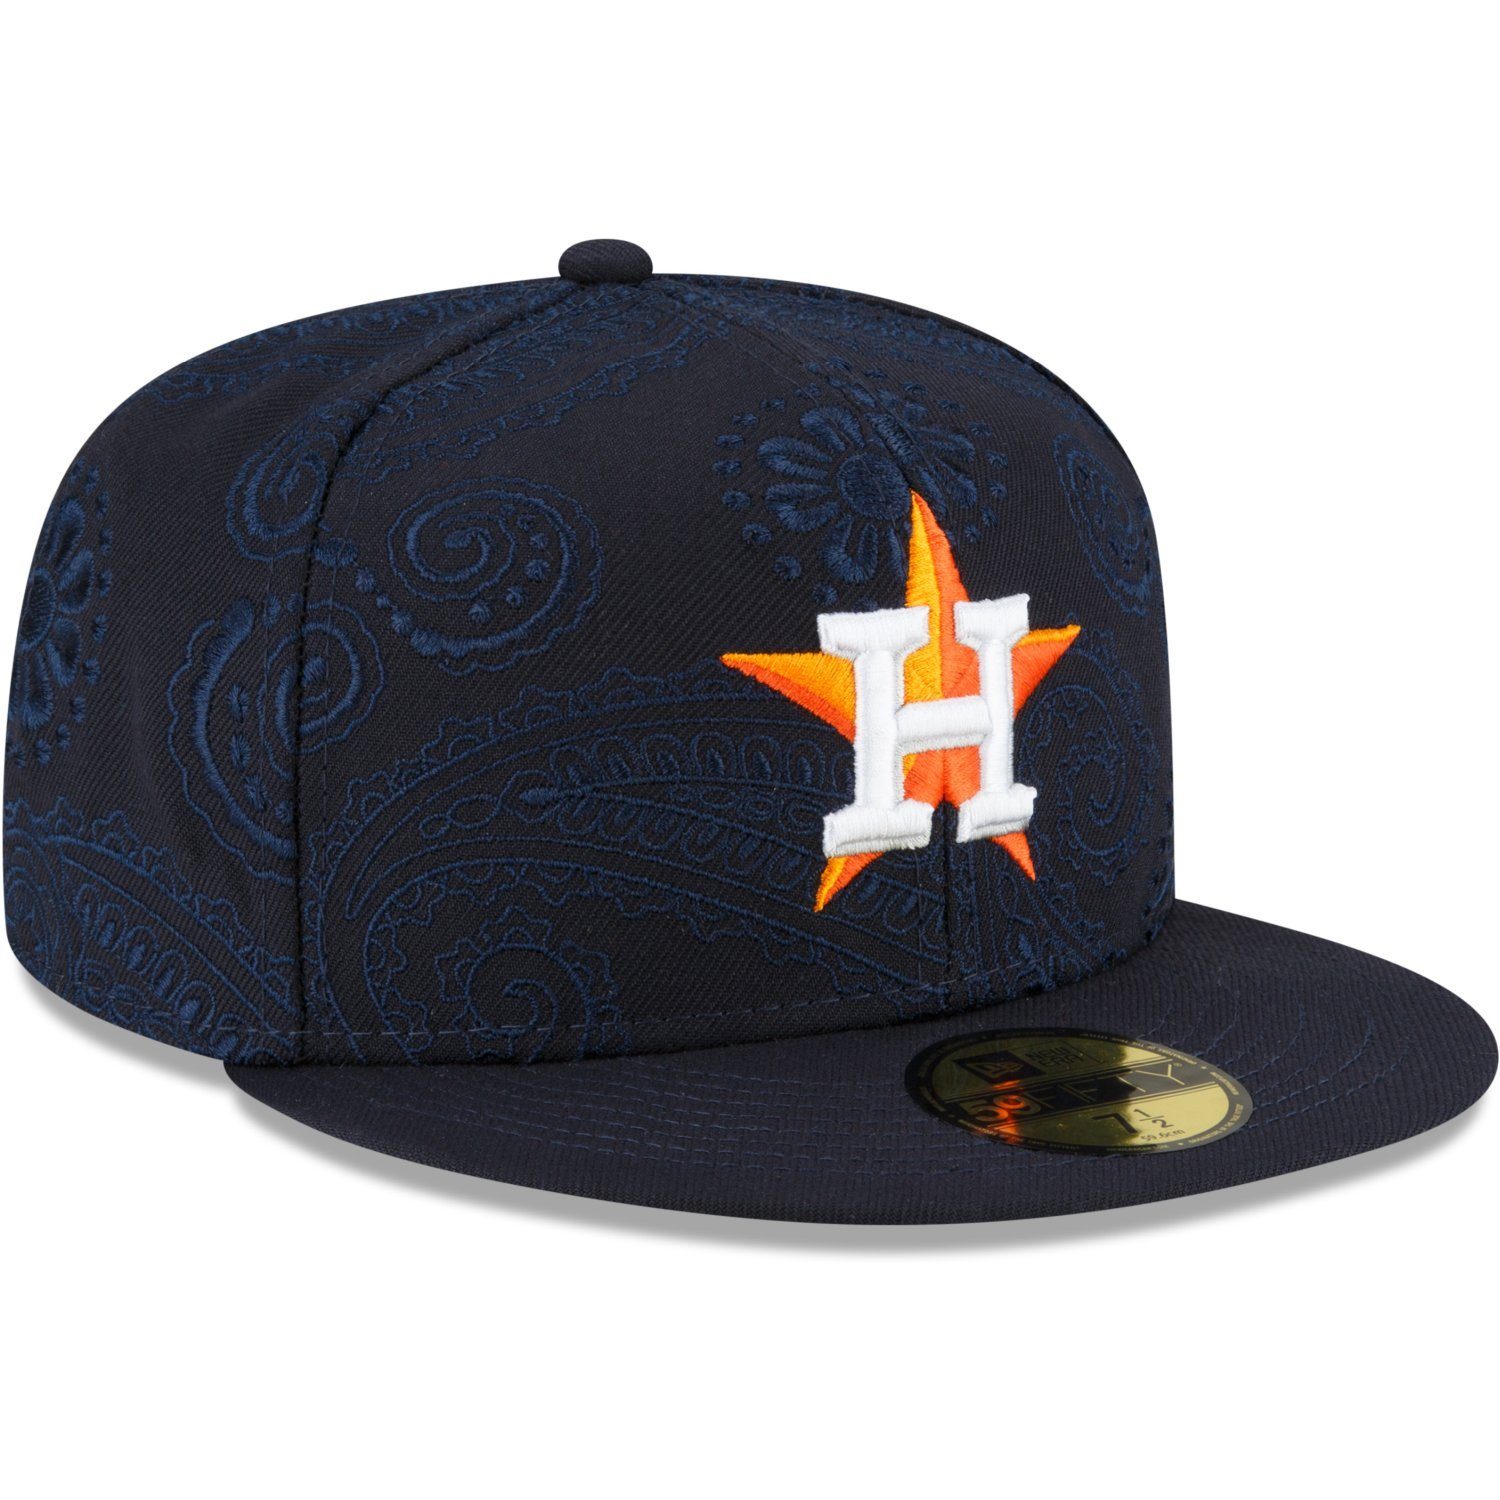 Houston PAISLEY Astros Era Cap 59Fifty Fitted SWIRL New